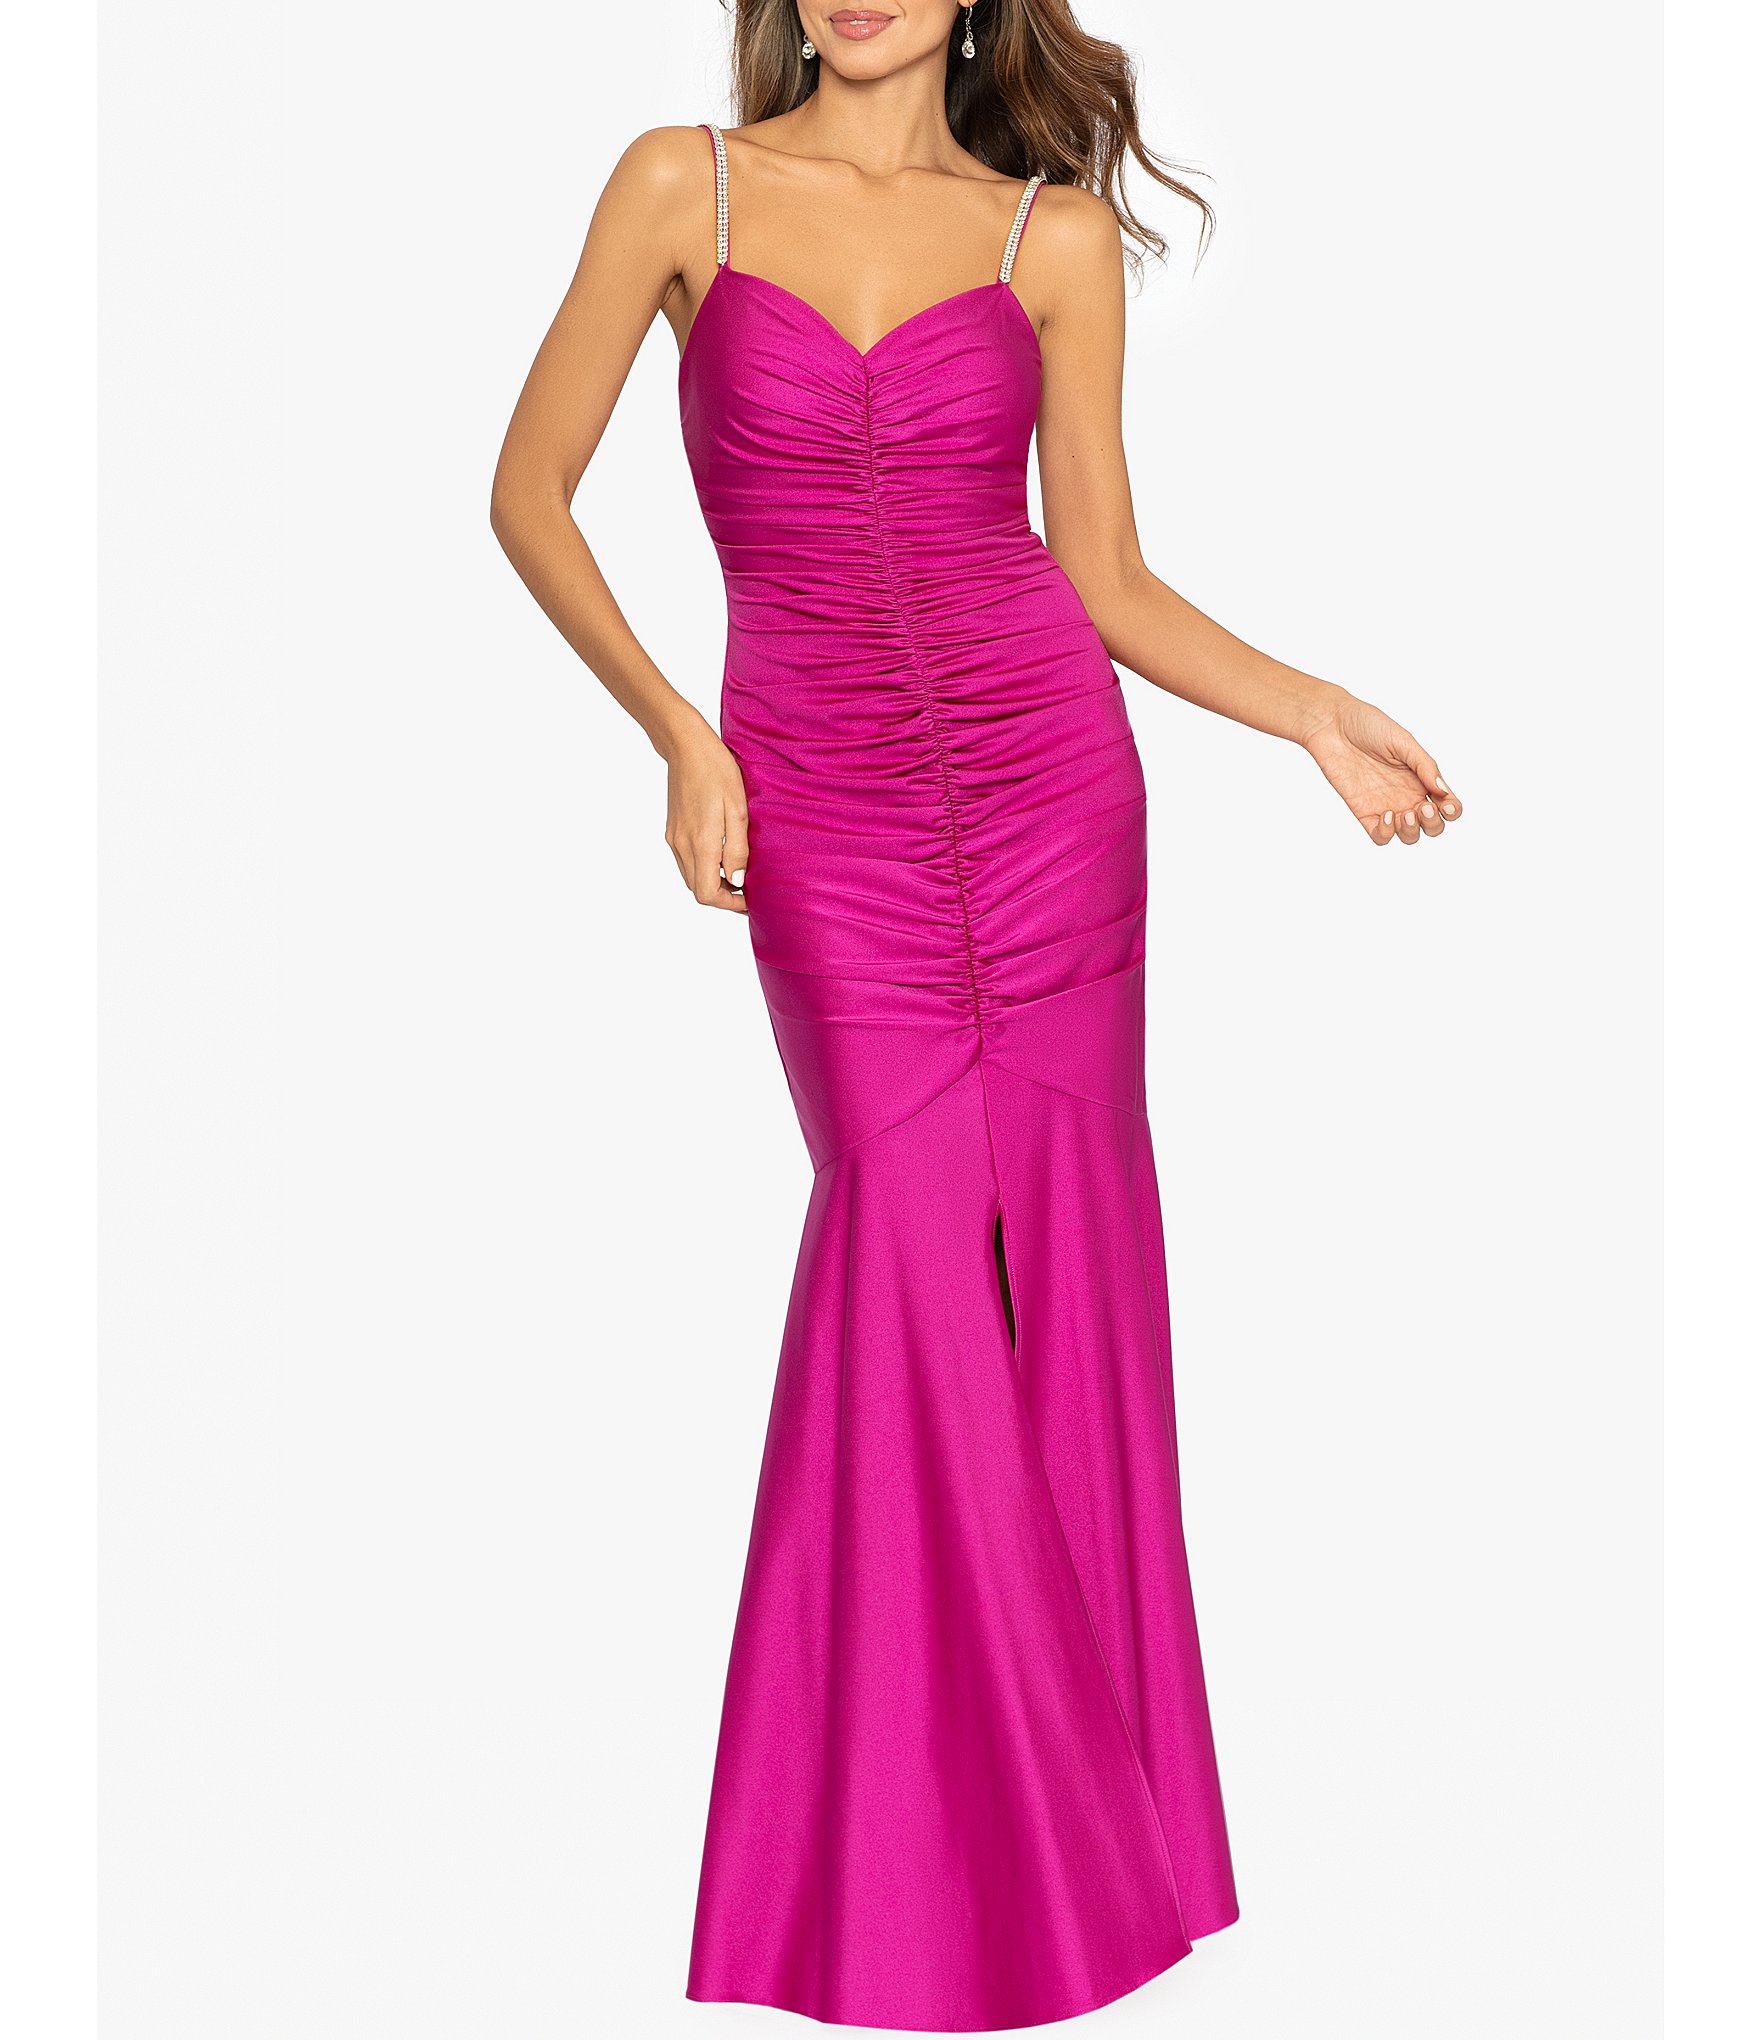 Xscape Sateen Sweetheart Neckline Sleeveless Ruched Mermaid Gown ...